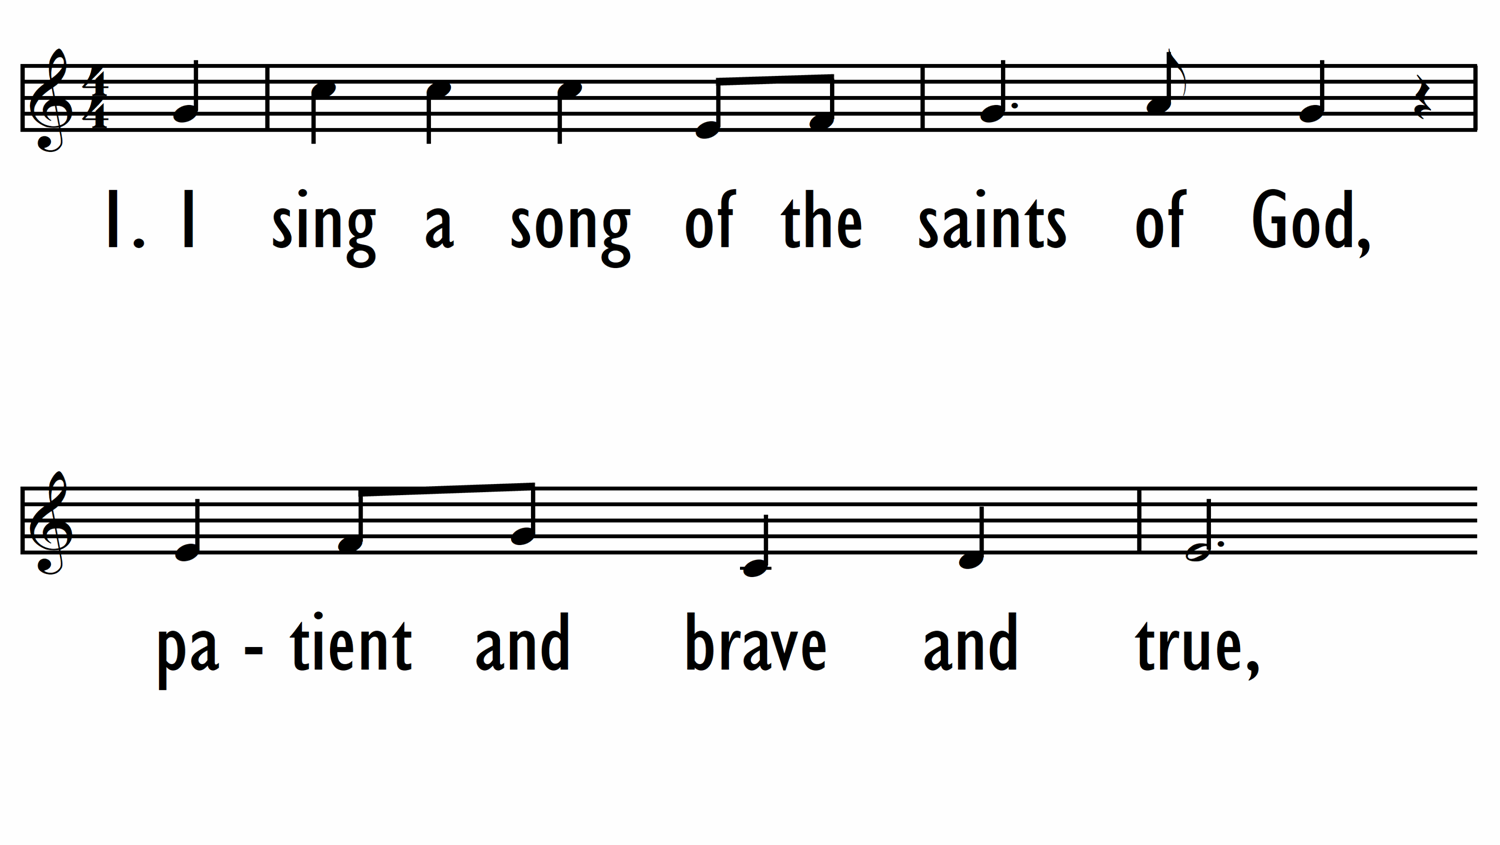 I SING A SONG OF THE SAINTS OF GOD-ppt